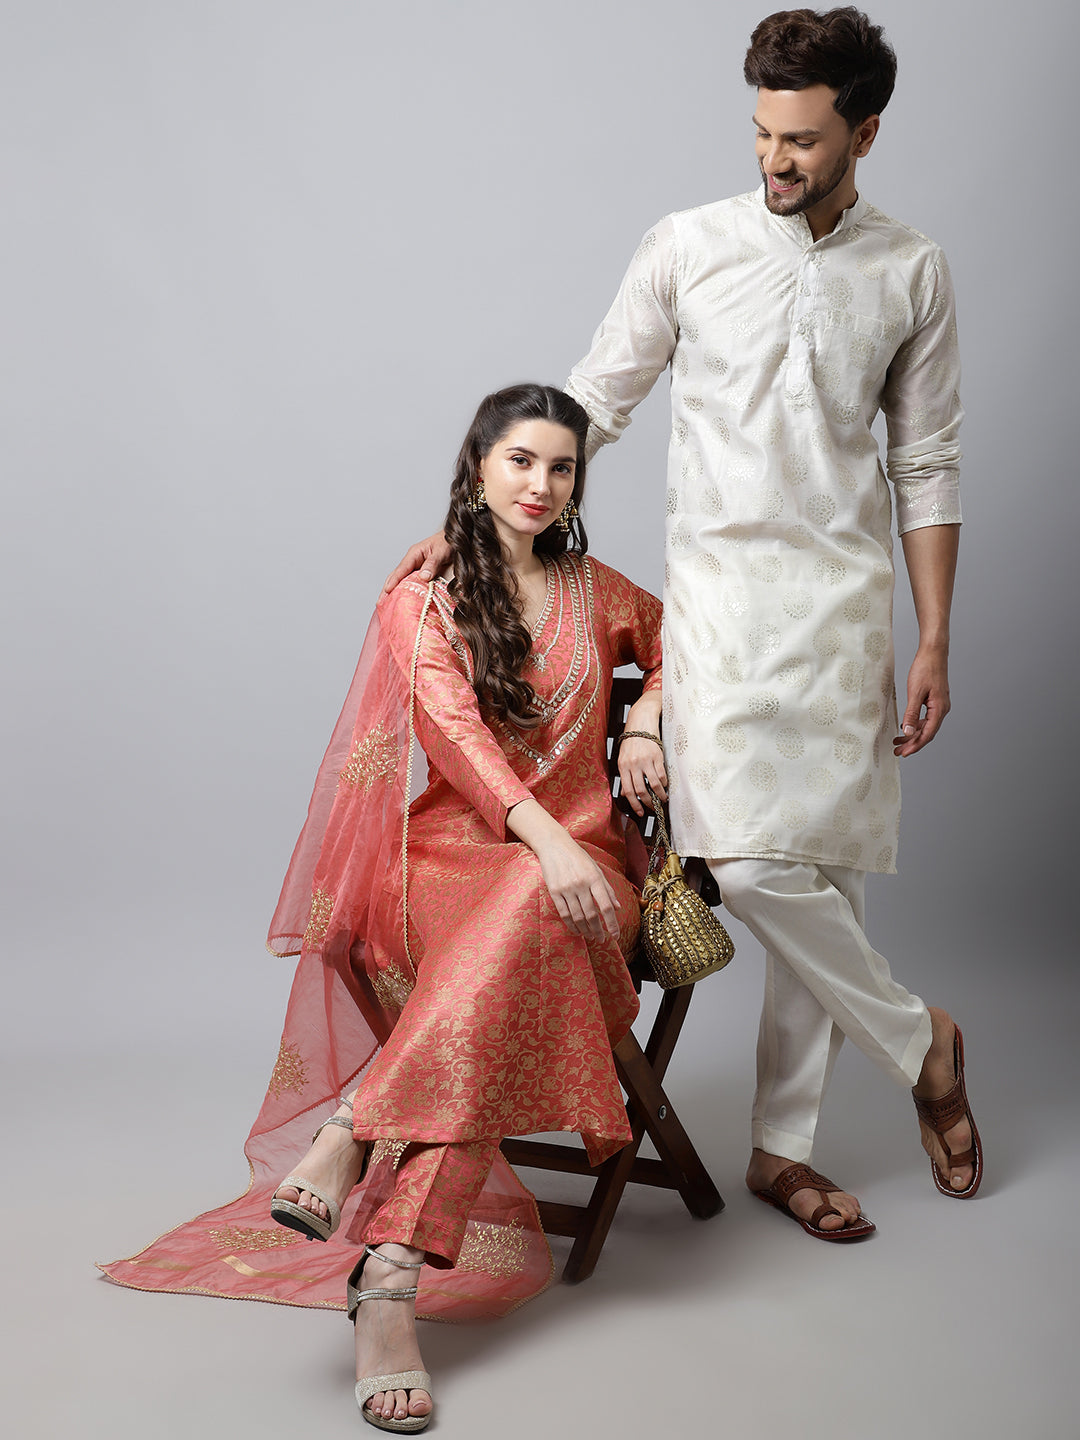 Ethnic couples dress online for parties, wedding - Shop online women  fashion, indo-western, ethnic wear, sari, suits, kurtis, watches, gifts.